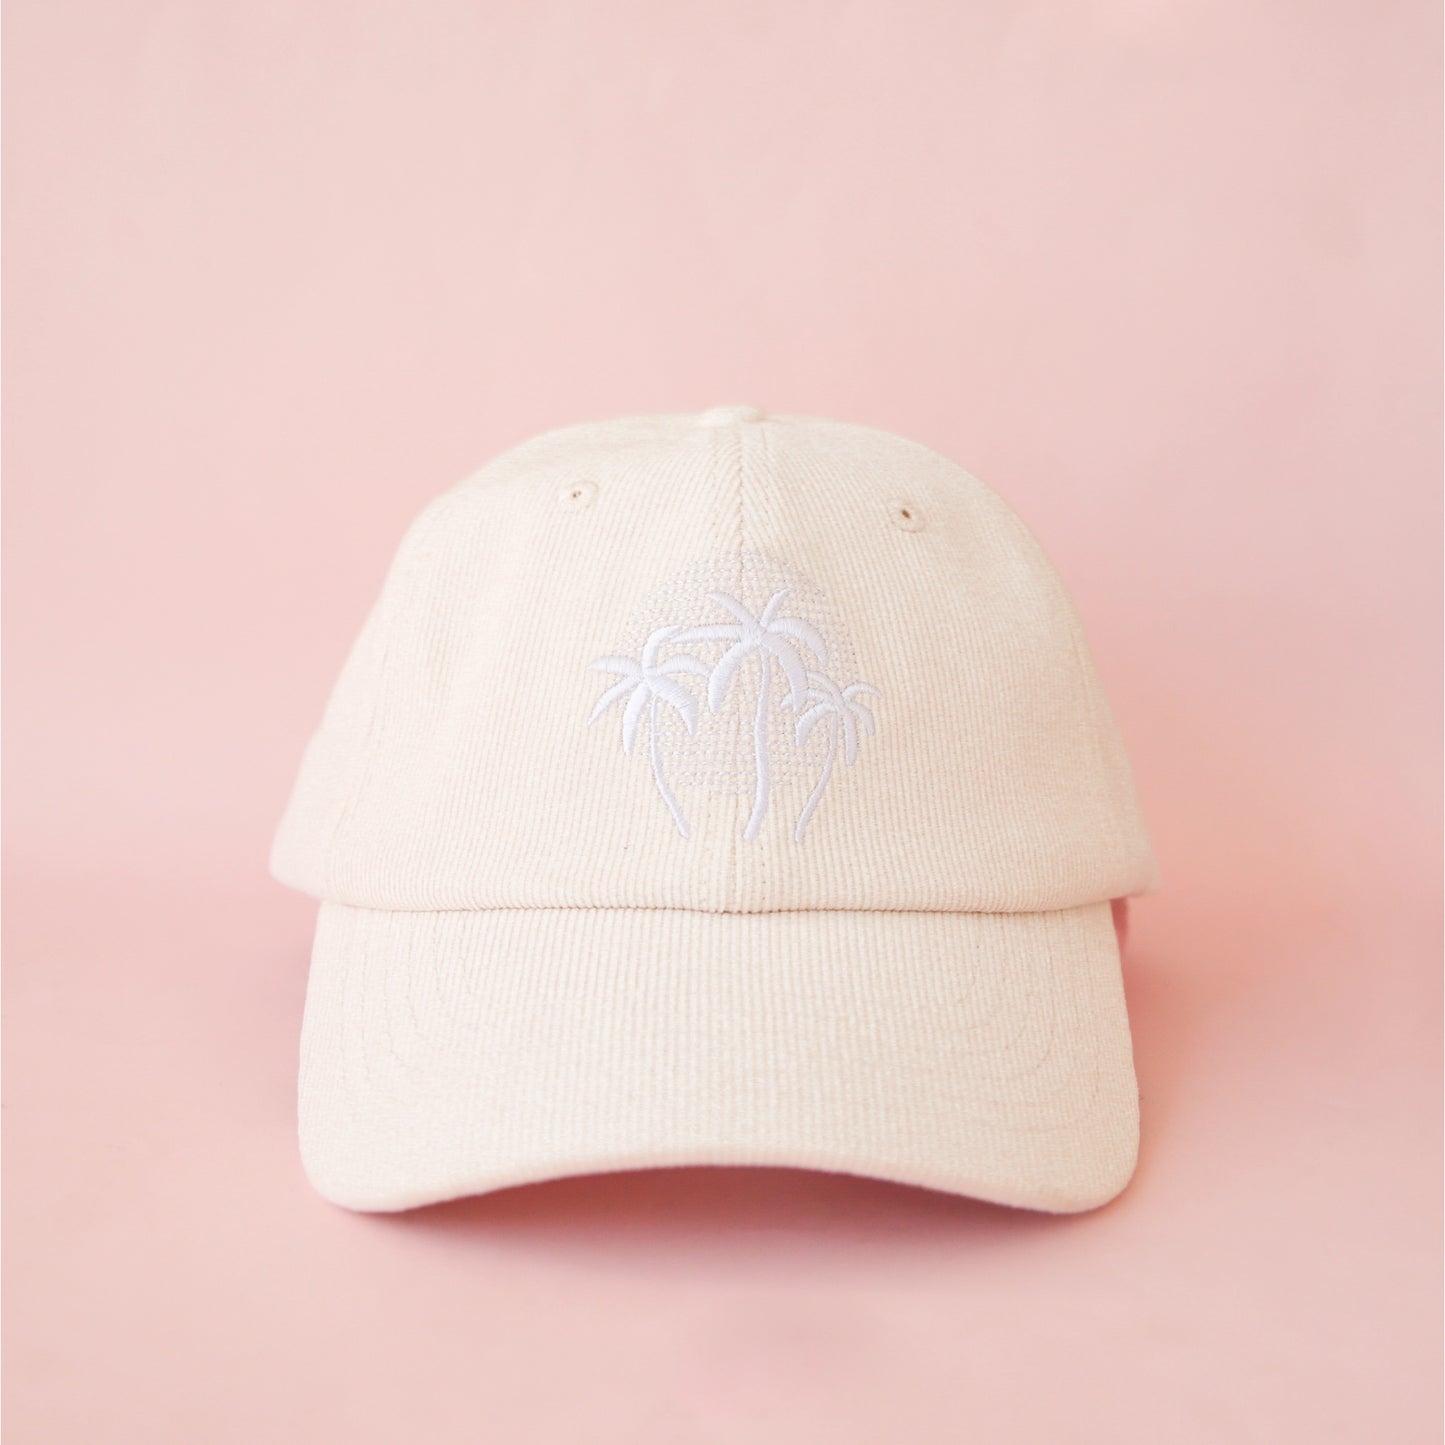 On a pink background is an ivory corduroy hat with a white embroidered palm tree graphic. 